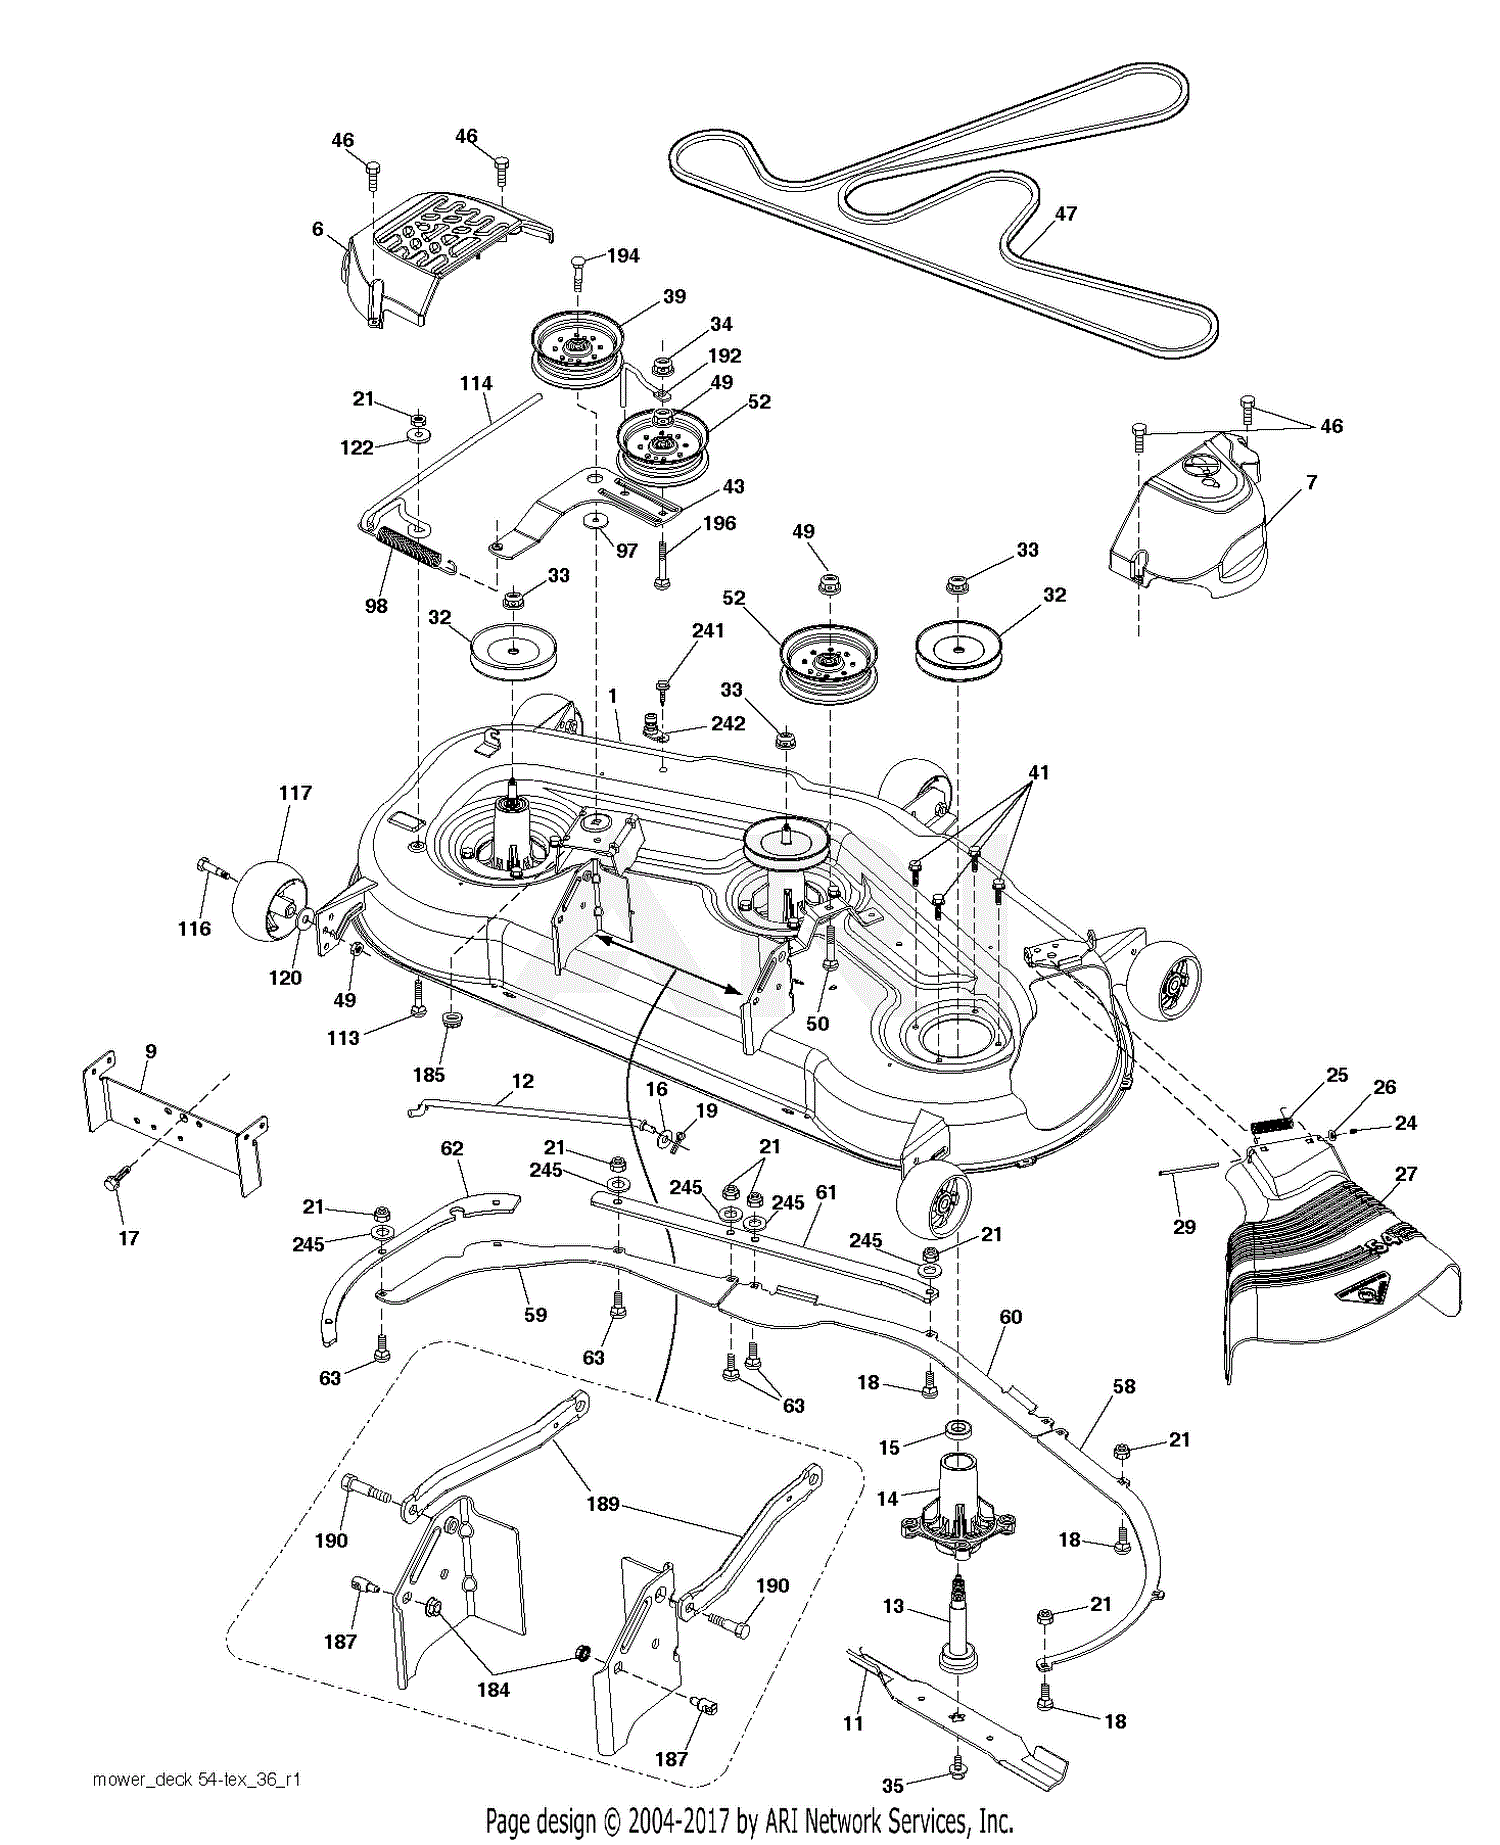 How to change drive belt on poulan pro riding mower Poulan Pp24va54 96046008000 2015 08 Parts Diagram For Mower Deck Cutting Deck